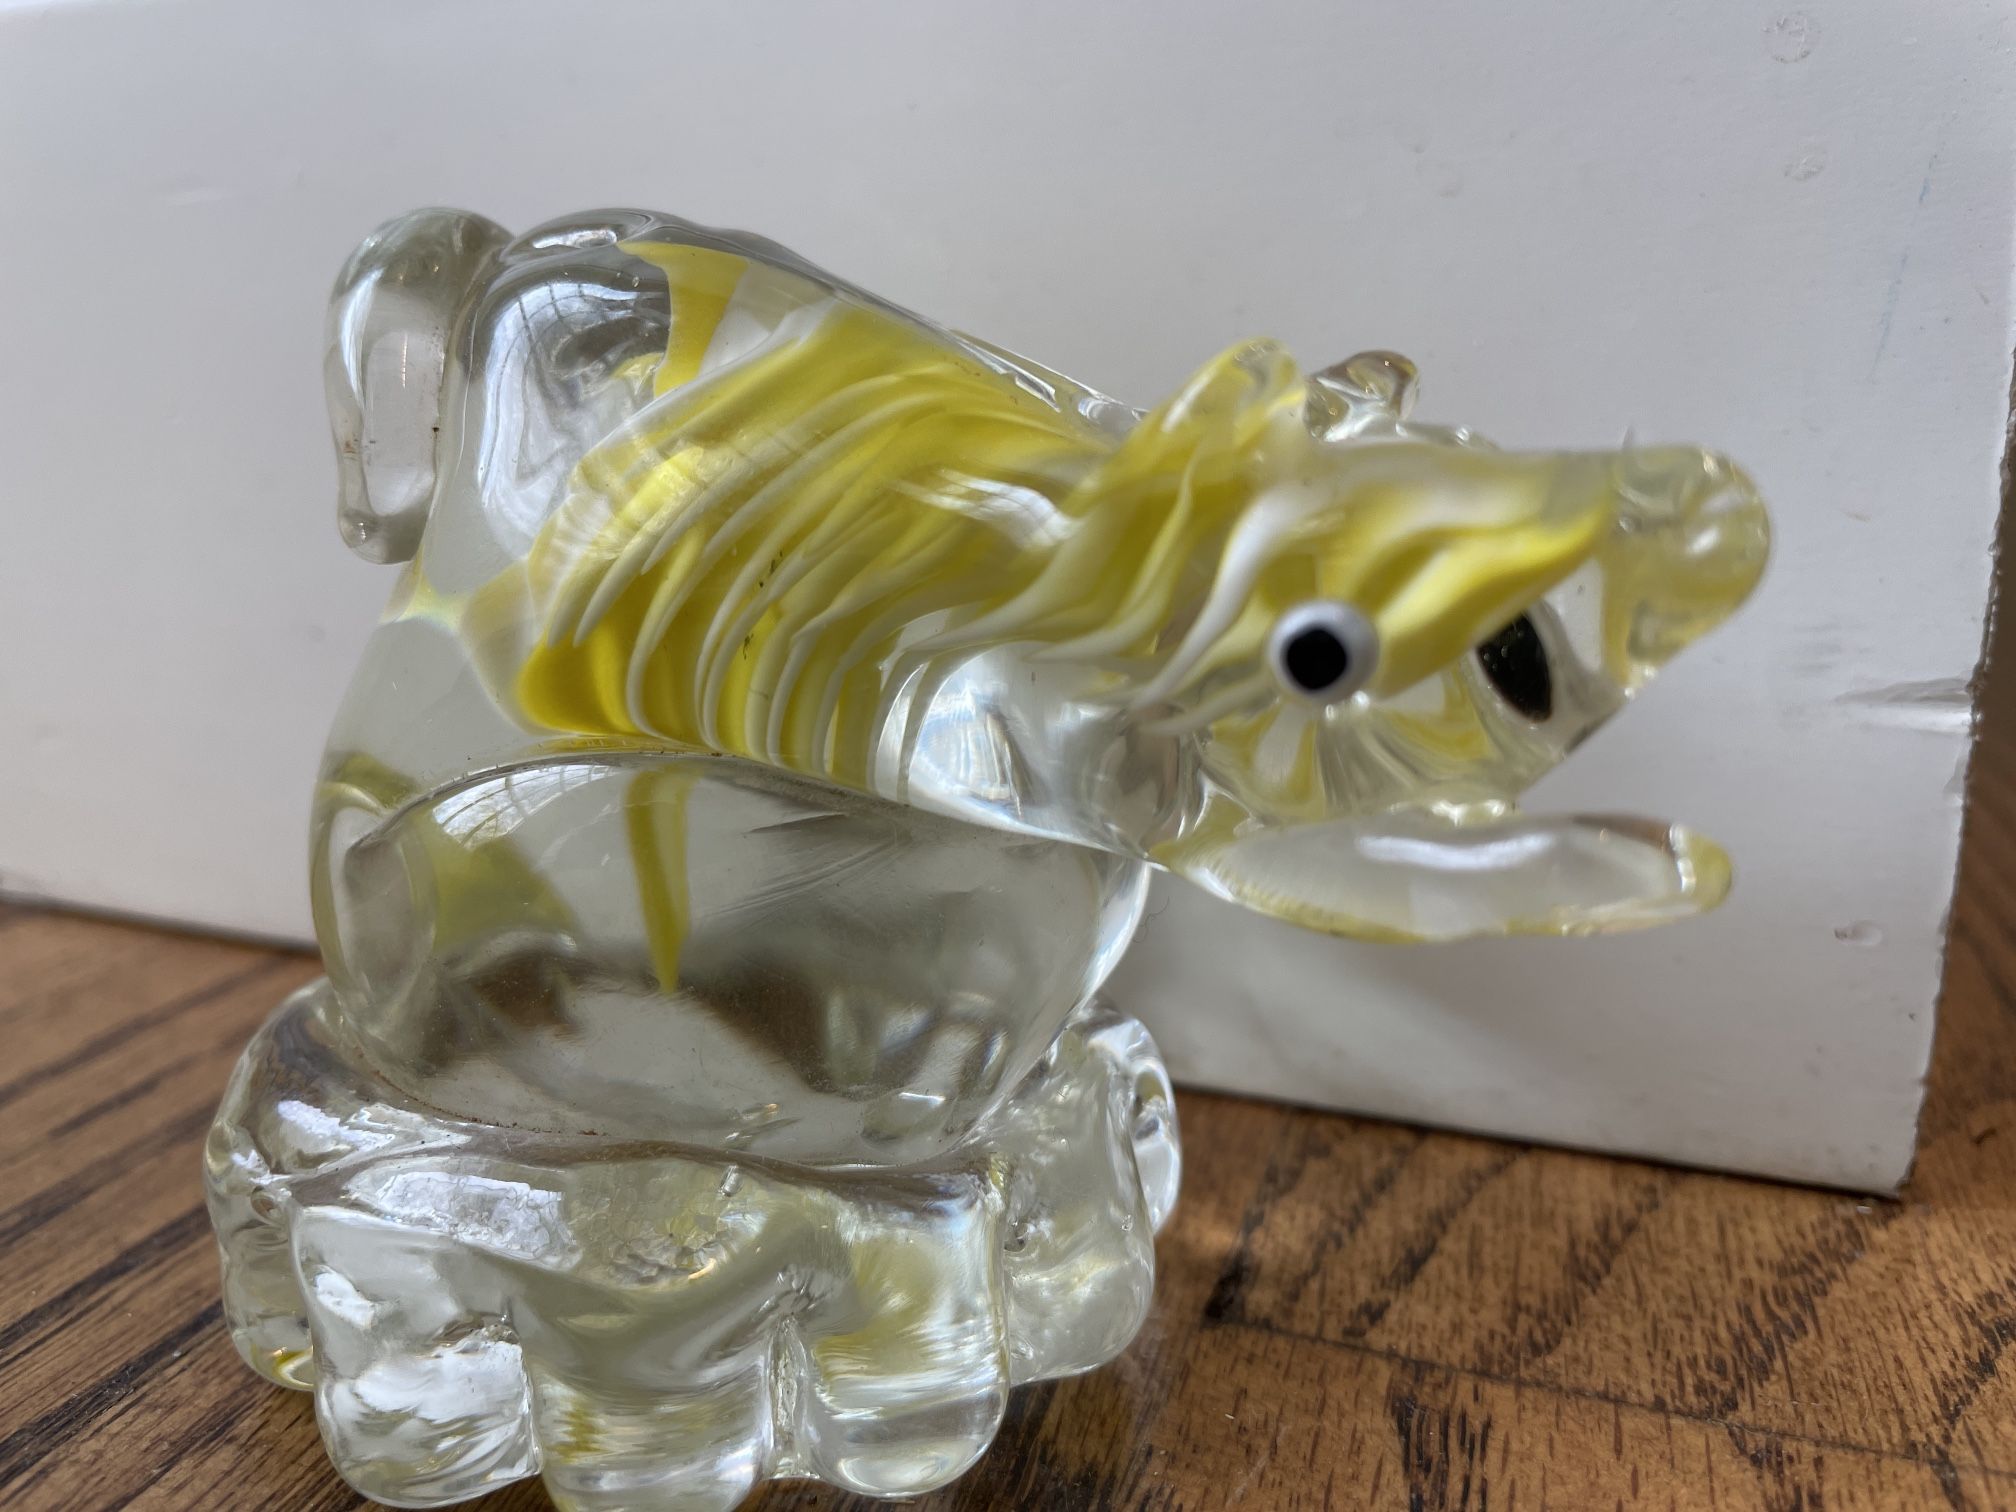 Vintage Art Glass Pig Boar 3.5" Sculpture Hand Blown Yellow Glass Figure. Condition is pre owned and is overall in solid and respectable shape.   This